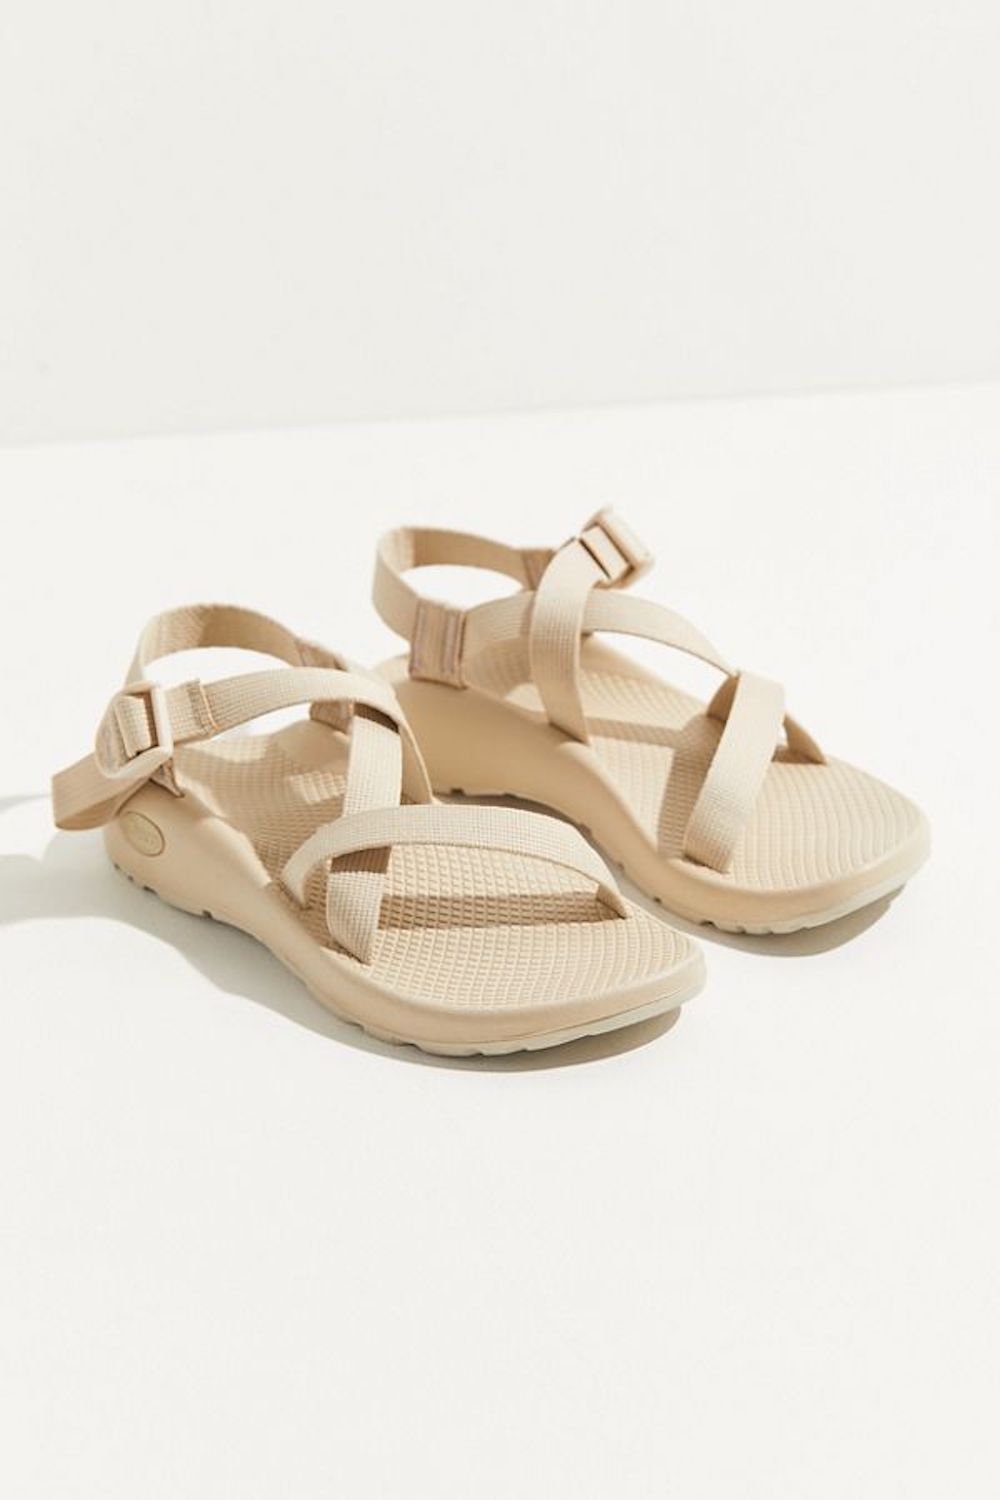 These Utilitarian Sandals Prove That The 90's Are Back - Camille Styles